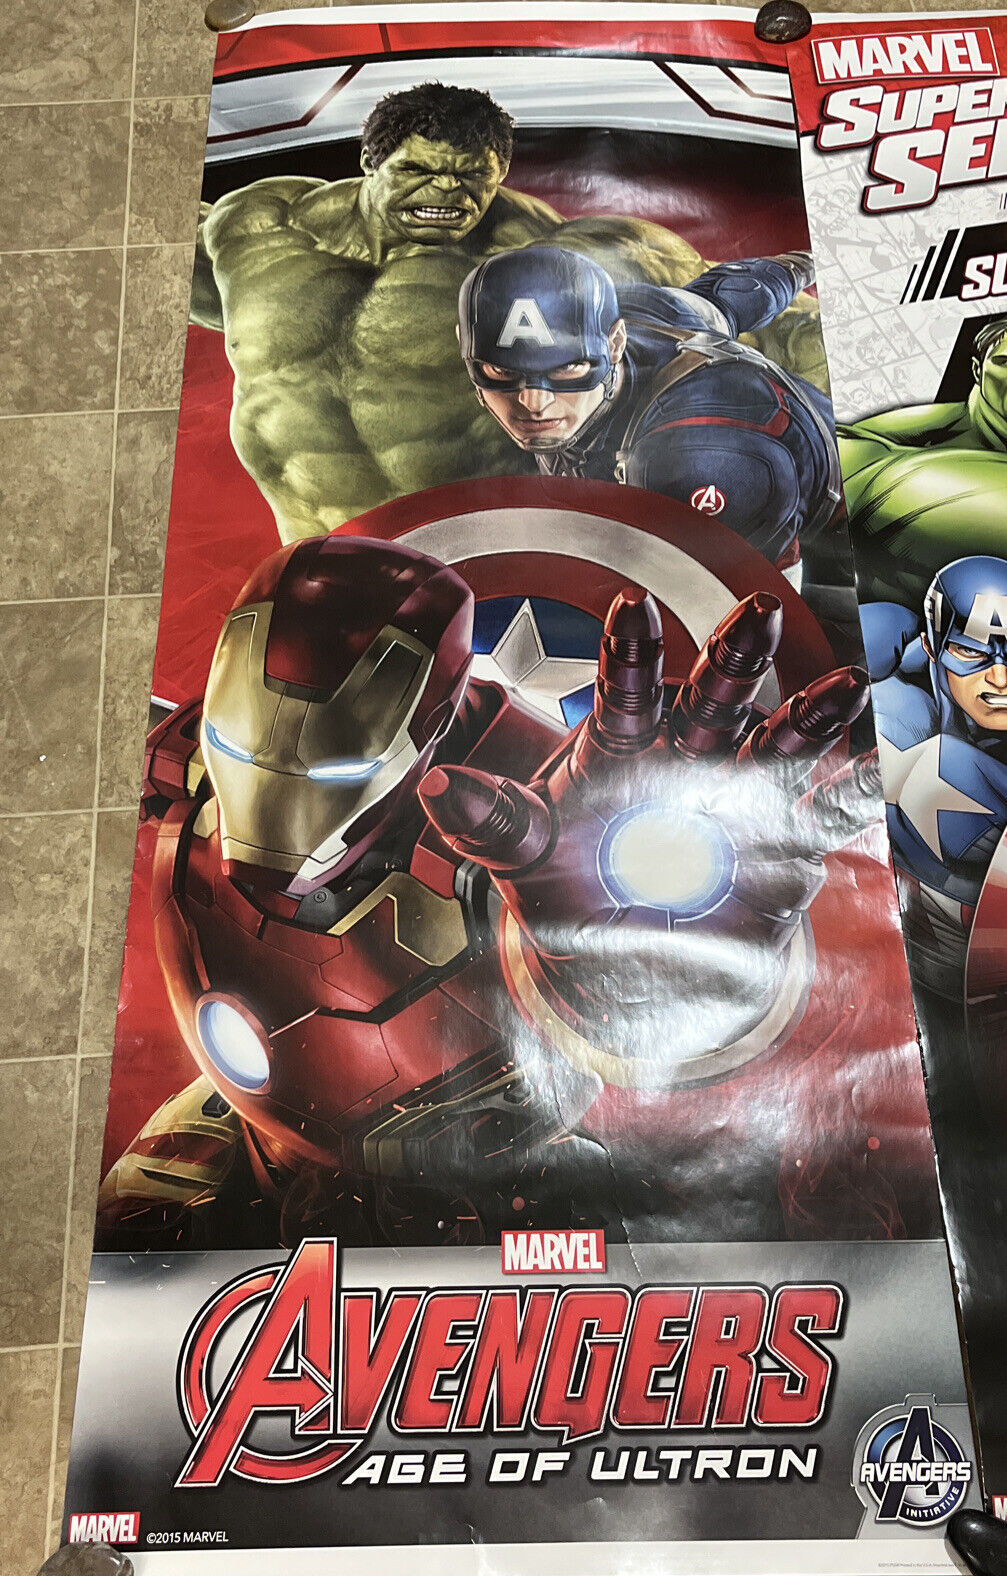 Marvel avengers age of ultron poster 2015 6’x28 1/2” tall